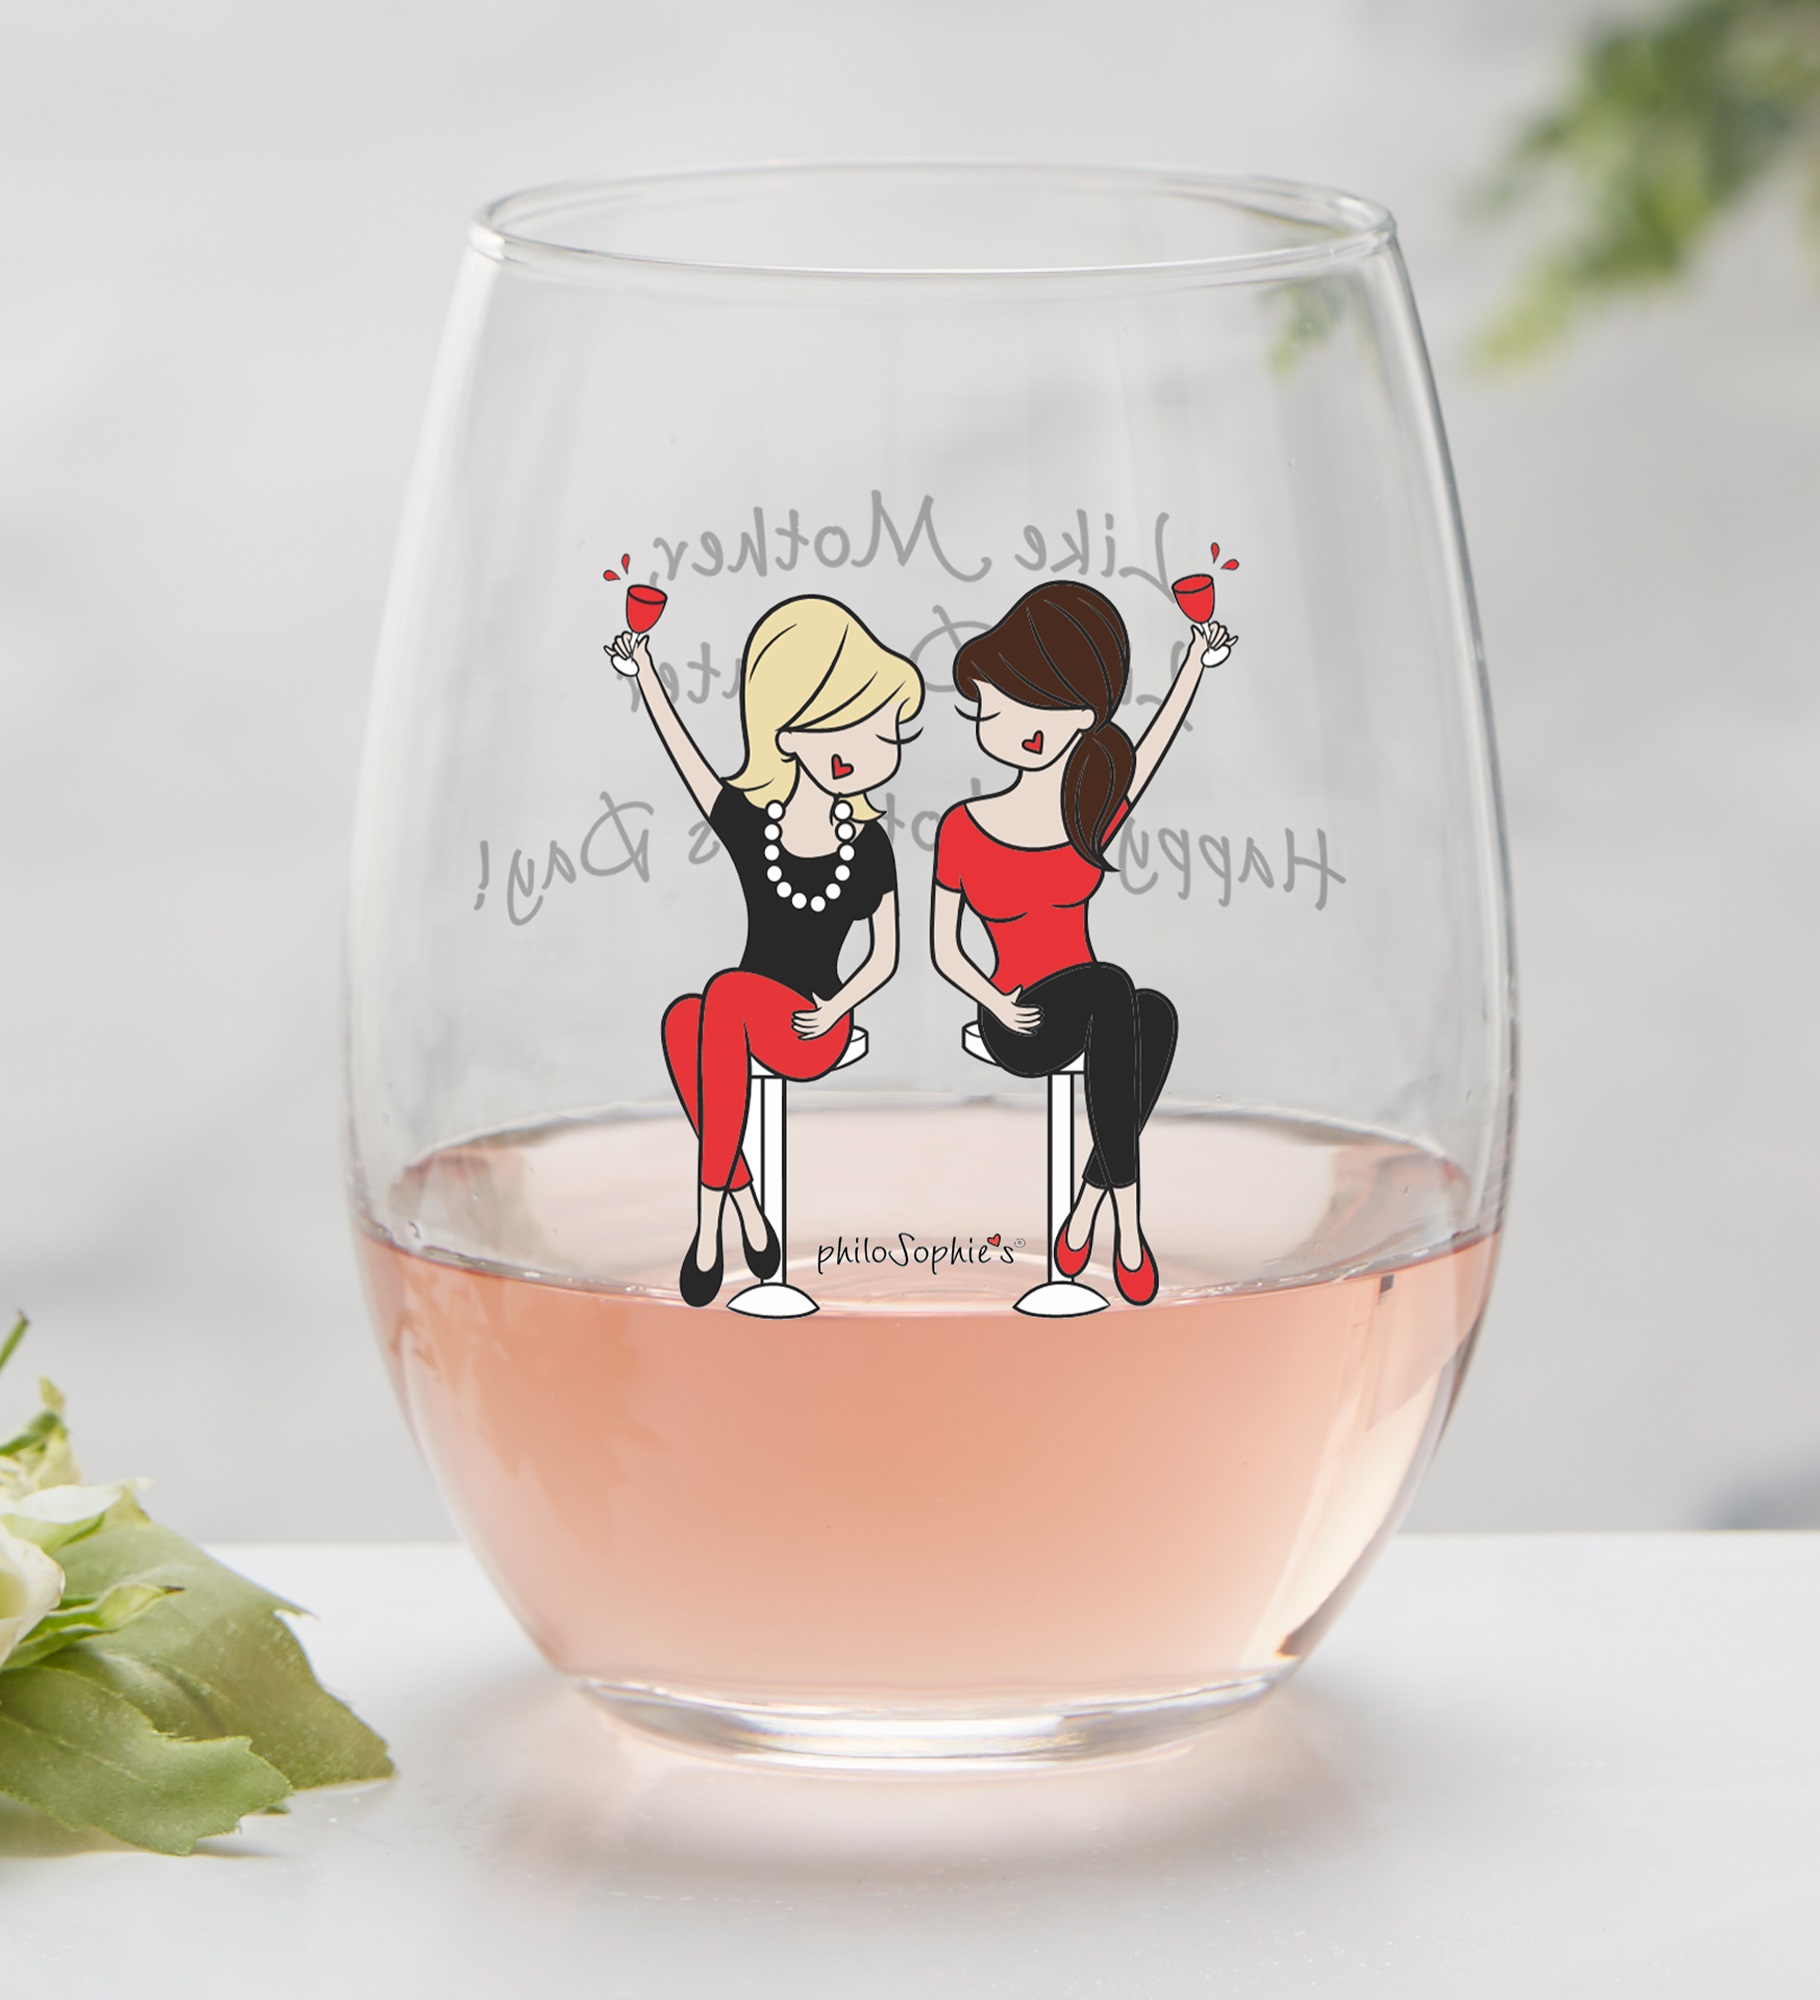 Like Mother Like Daughter philoSophie's® Personalized Wine Glasses